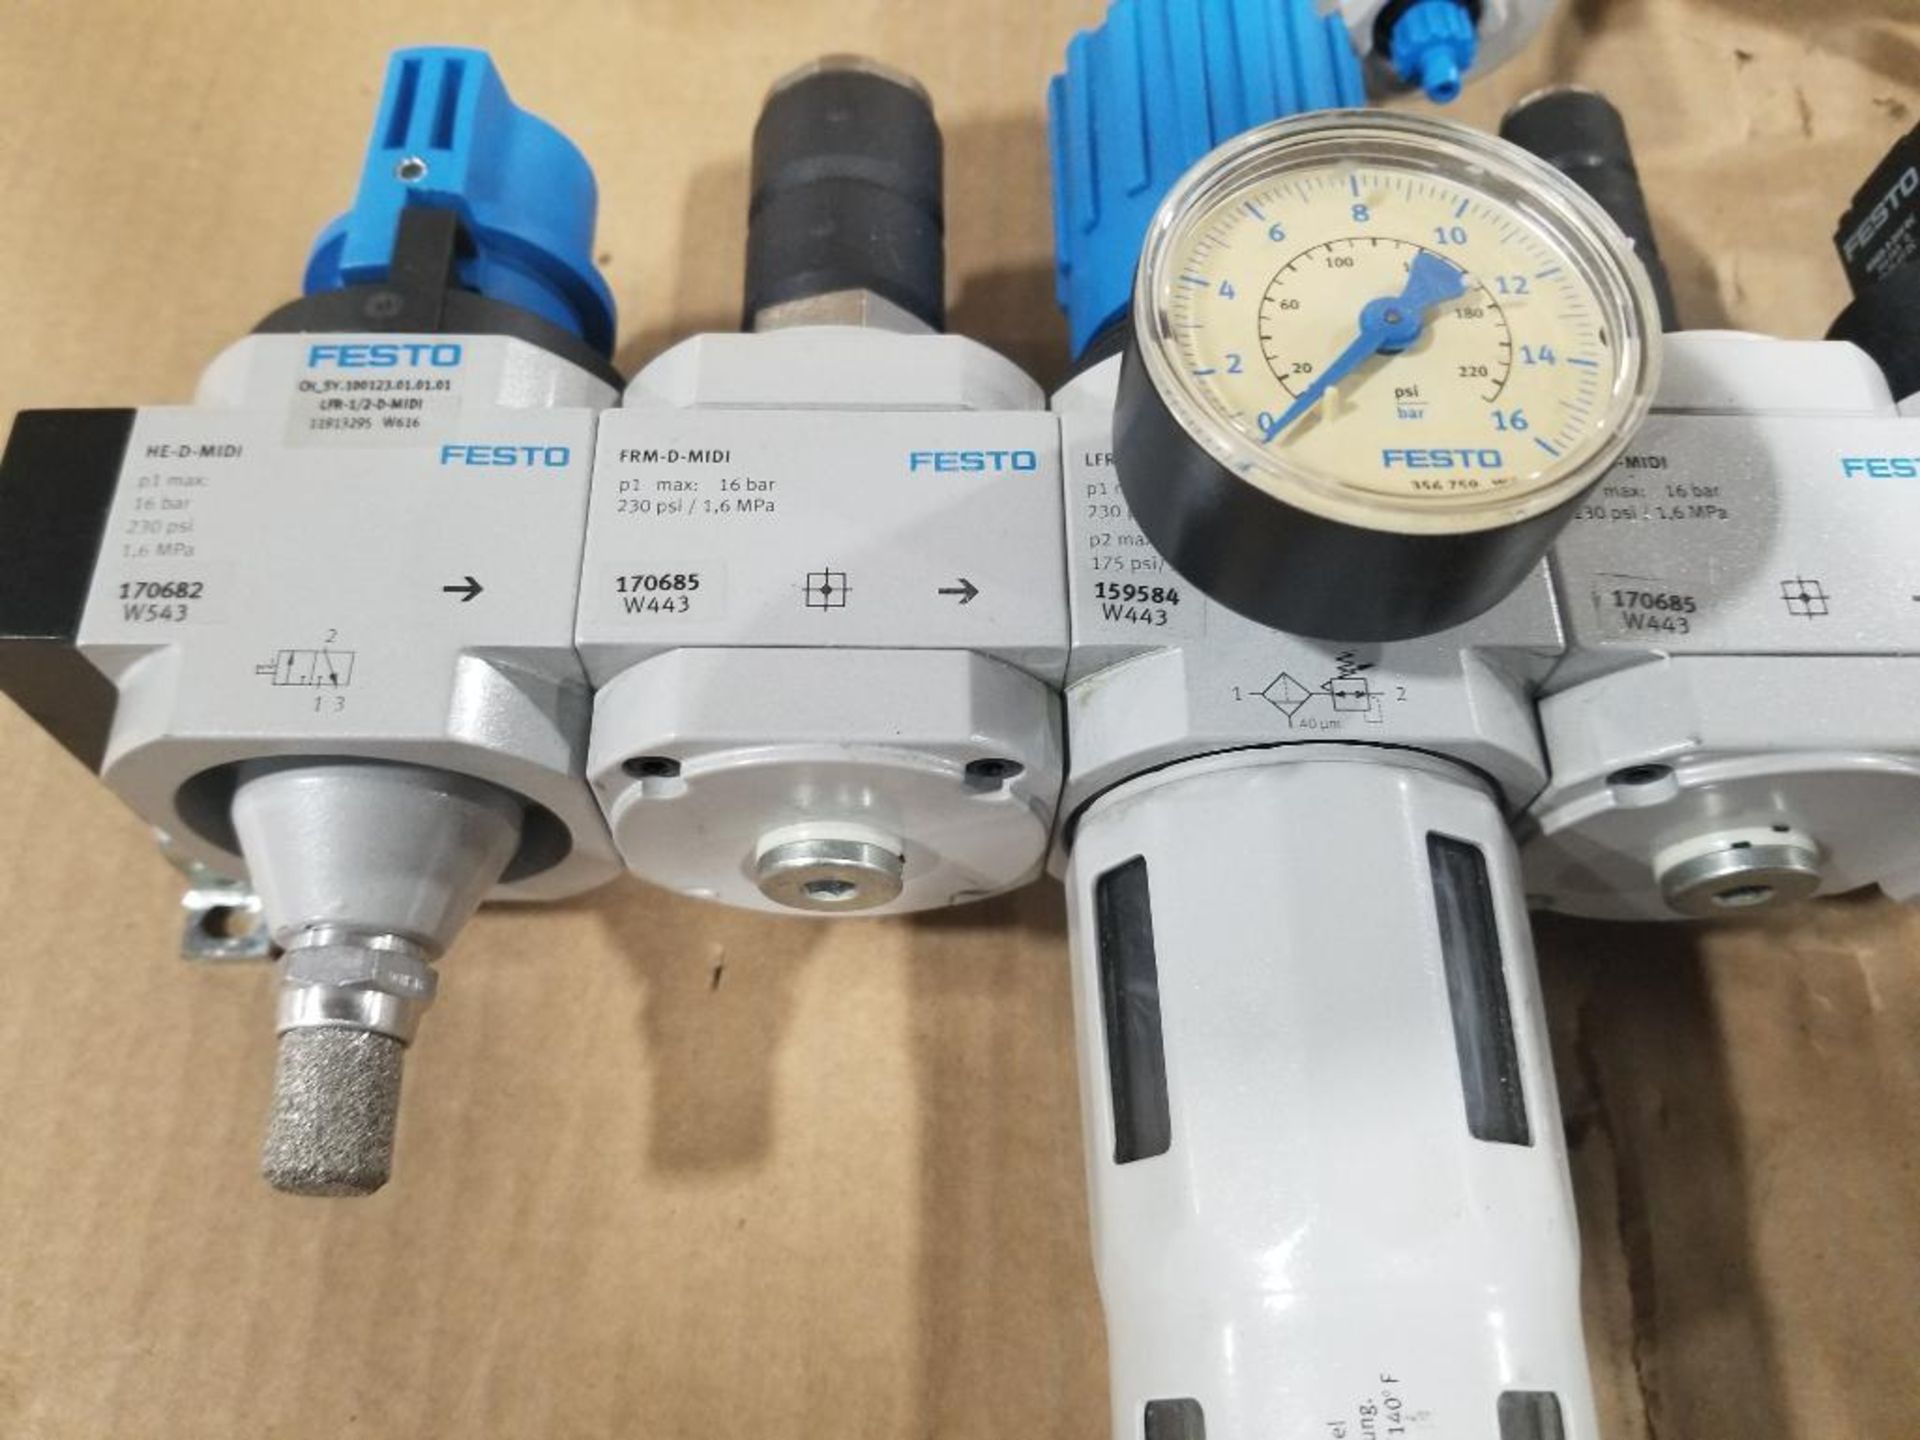 Qty 2 - Festo valves and filter assemblies. - Image 8 of 9